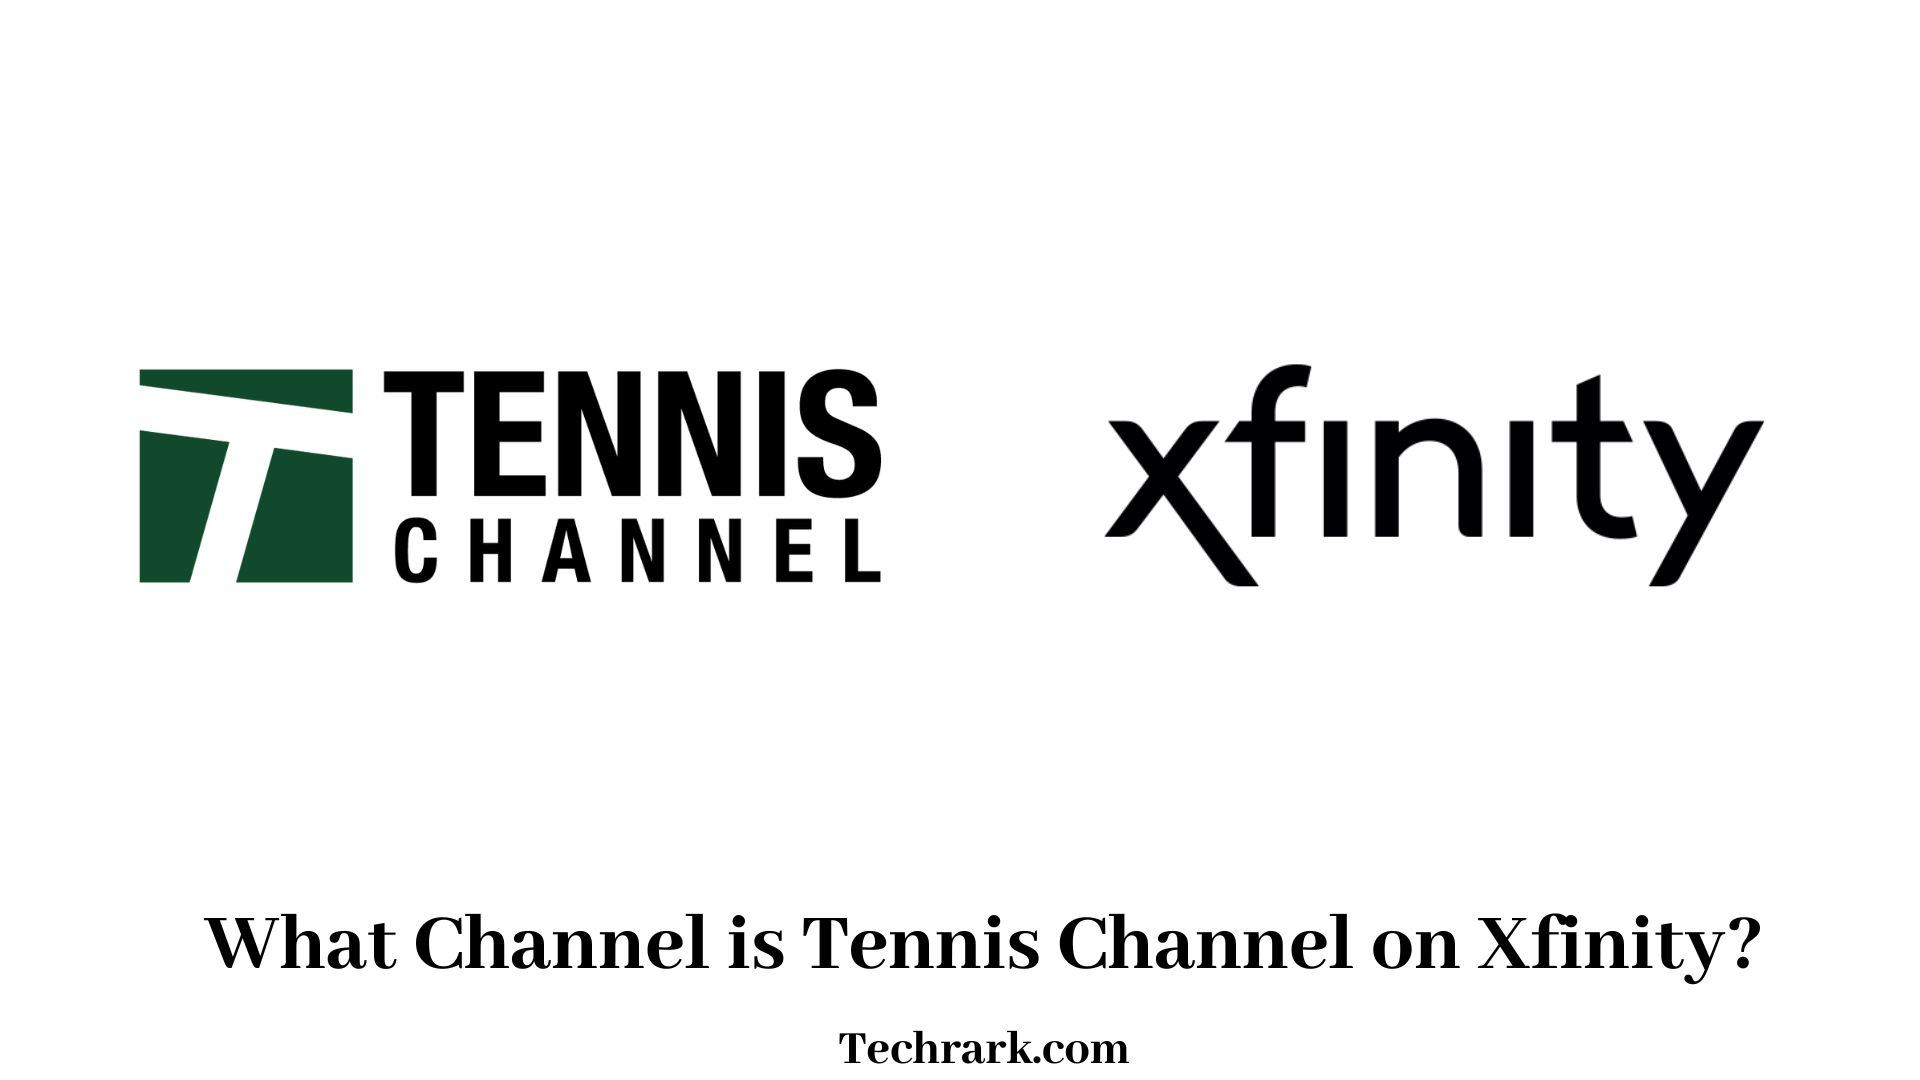 What Channel is Tennis Channel on Xfinity